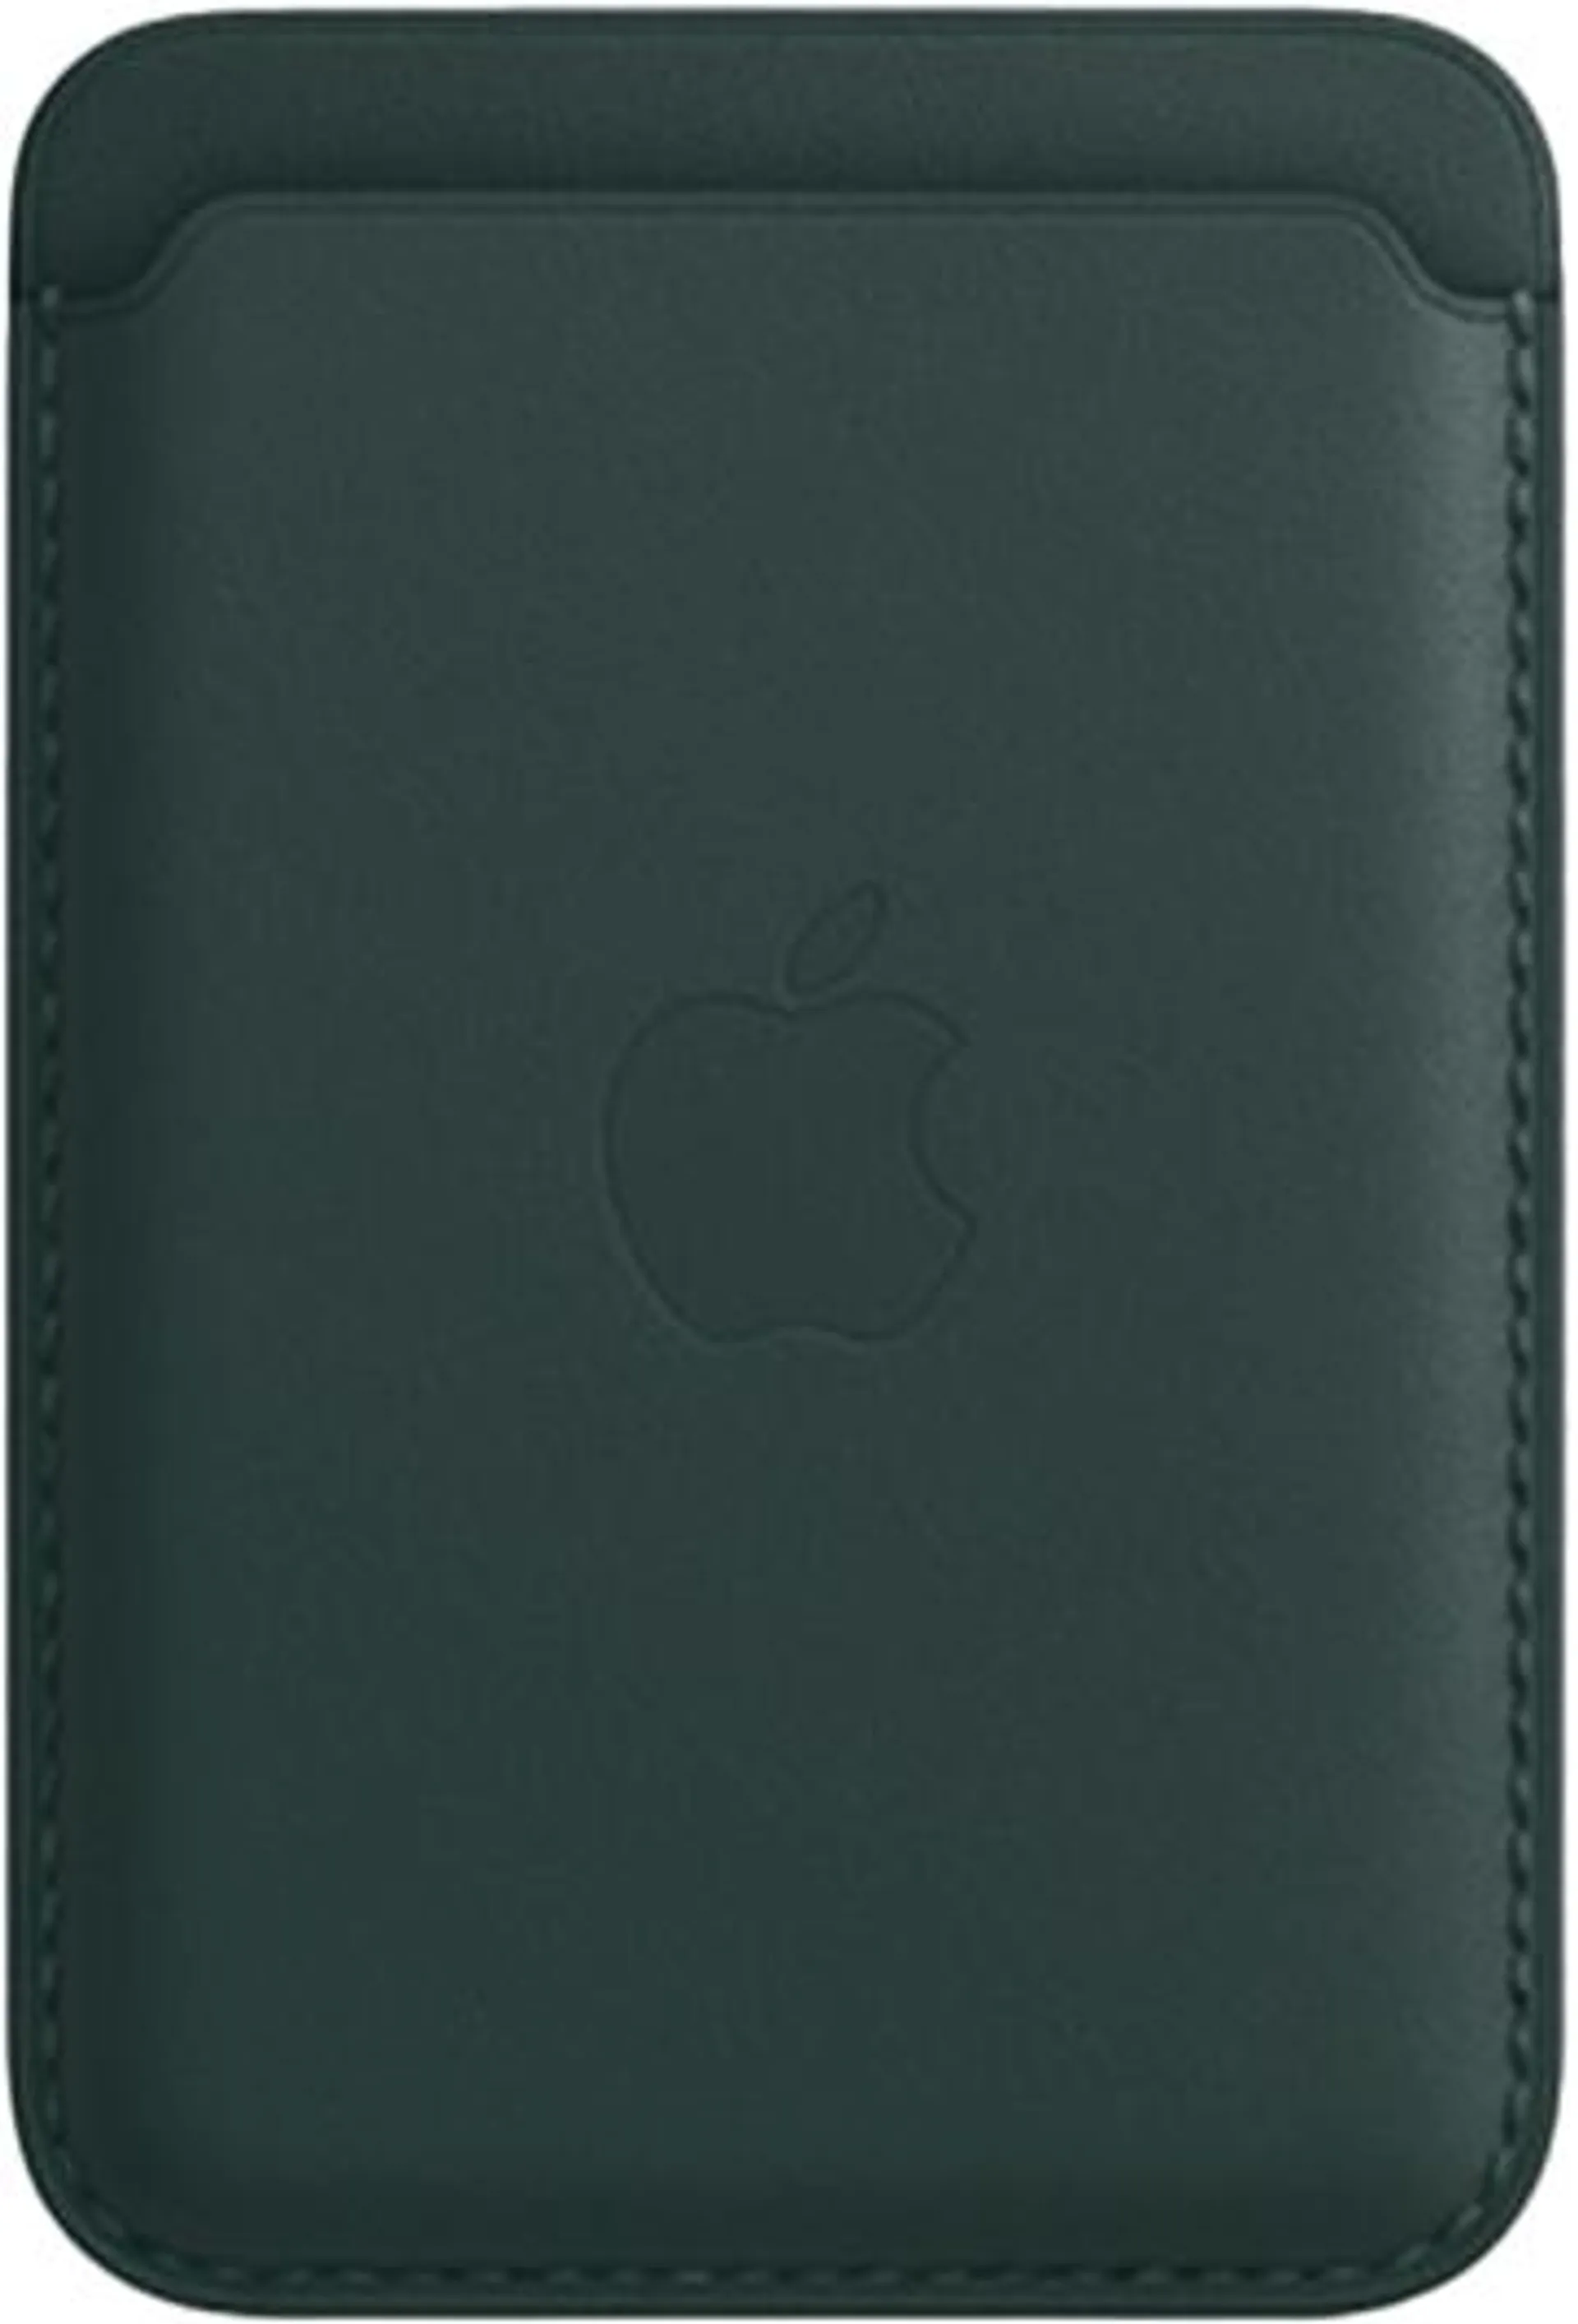 iPhone Leather Wallet MS